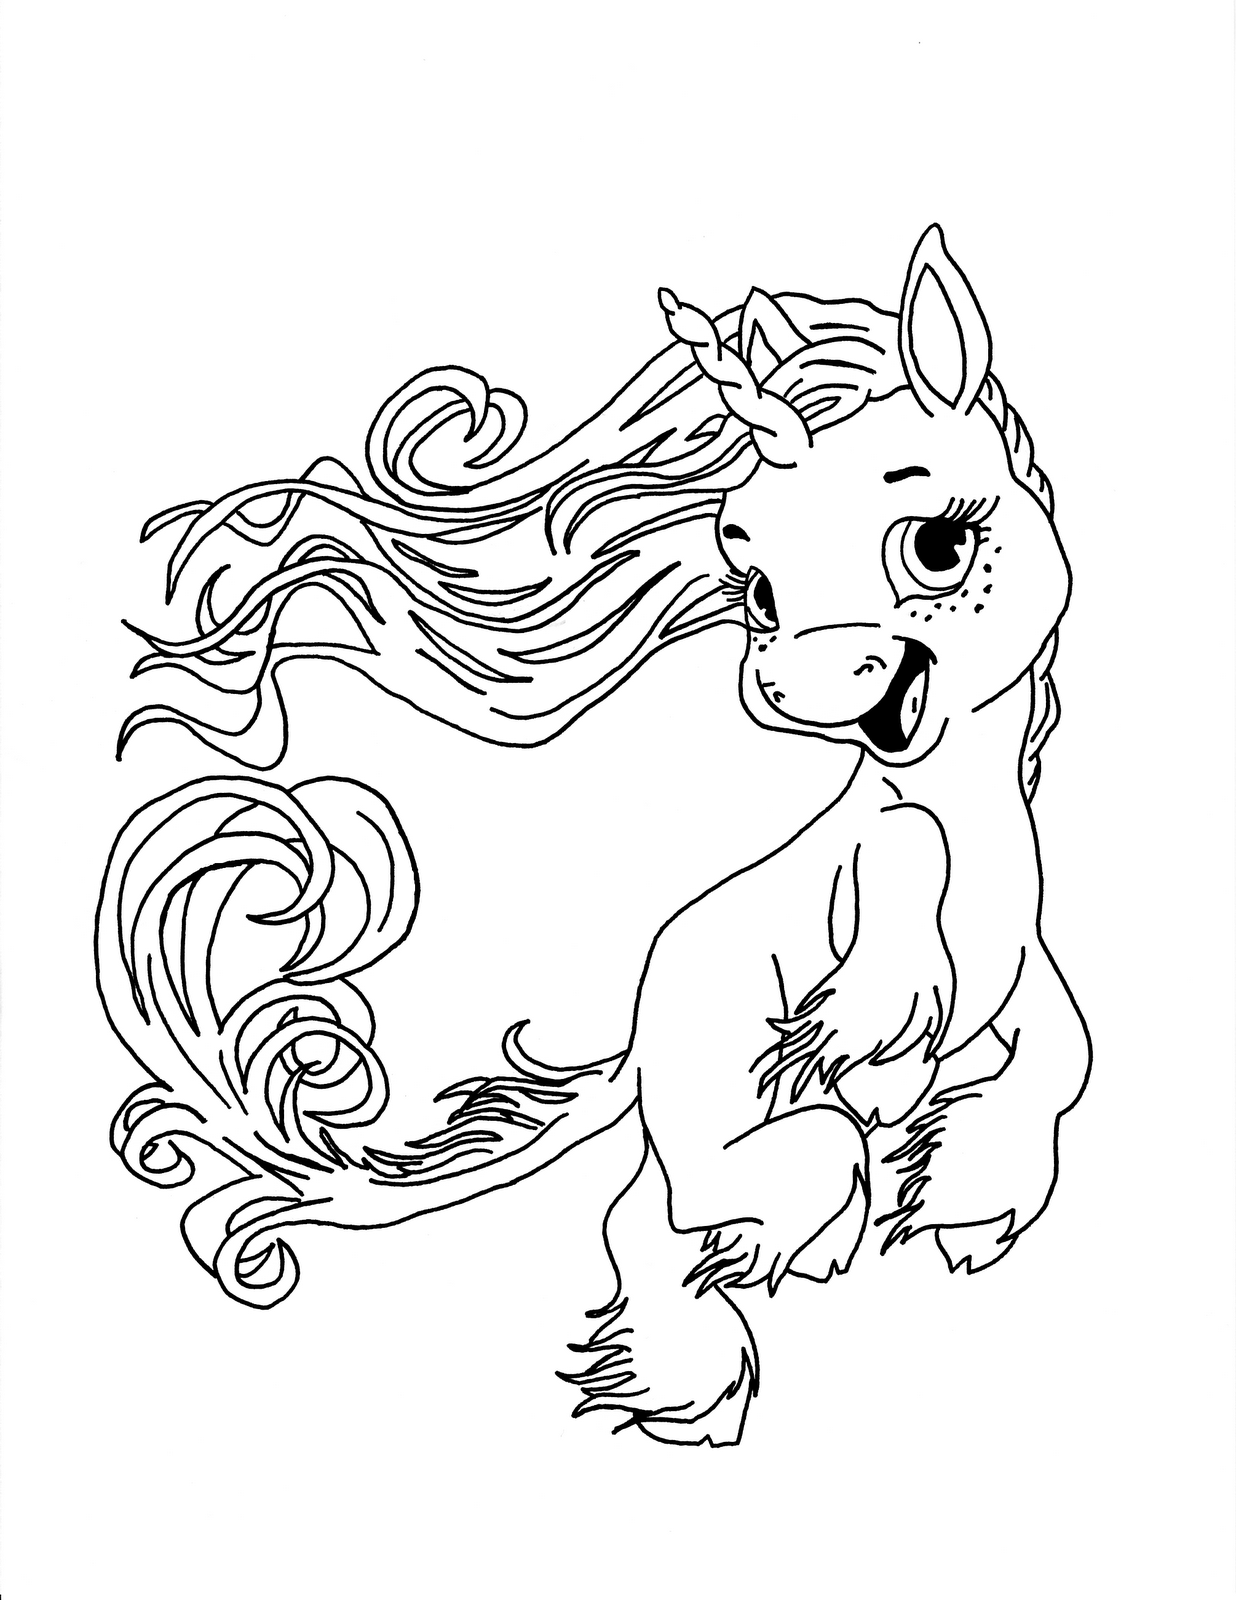 unicorn-coloring-pages-pdf-at-getcolorings-free-printable-colorings-pages-to-print-and-color